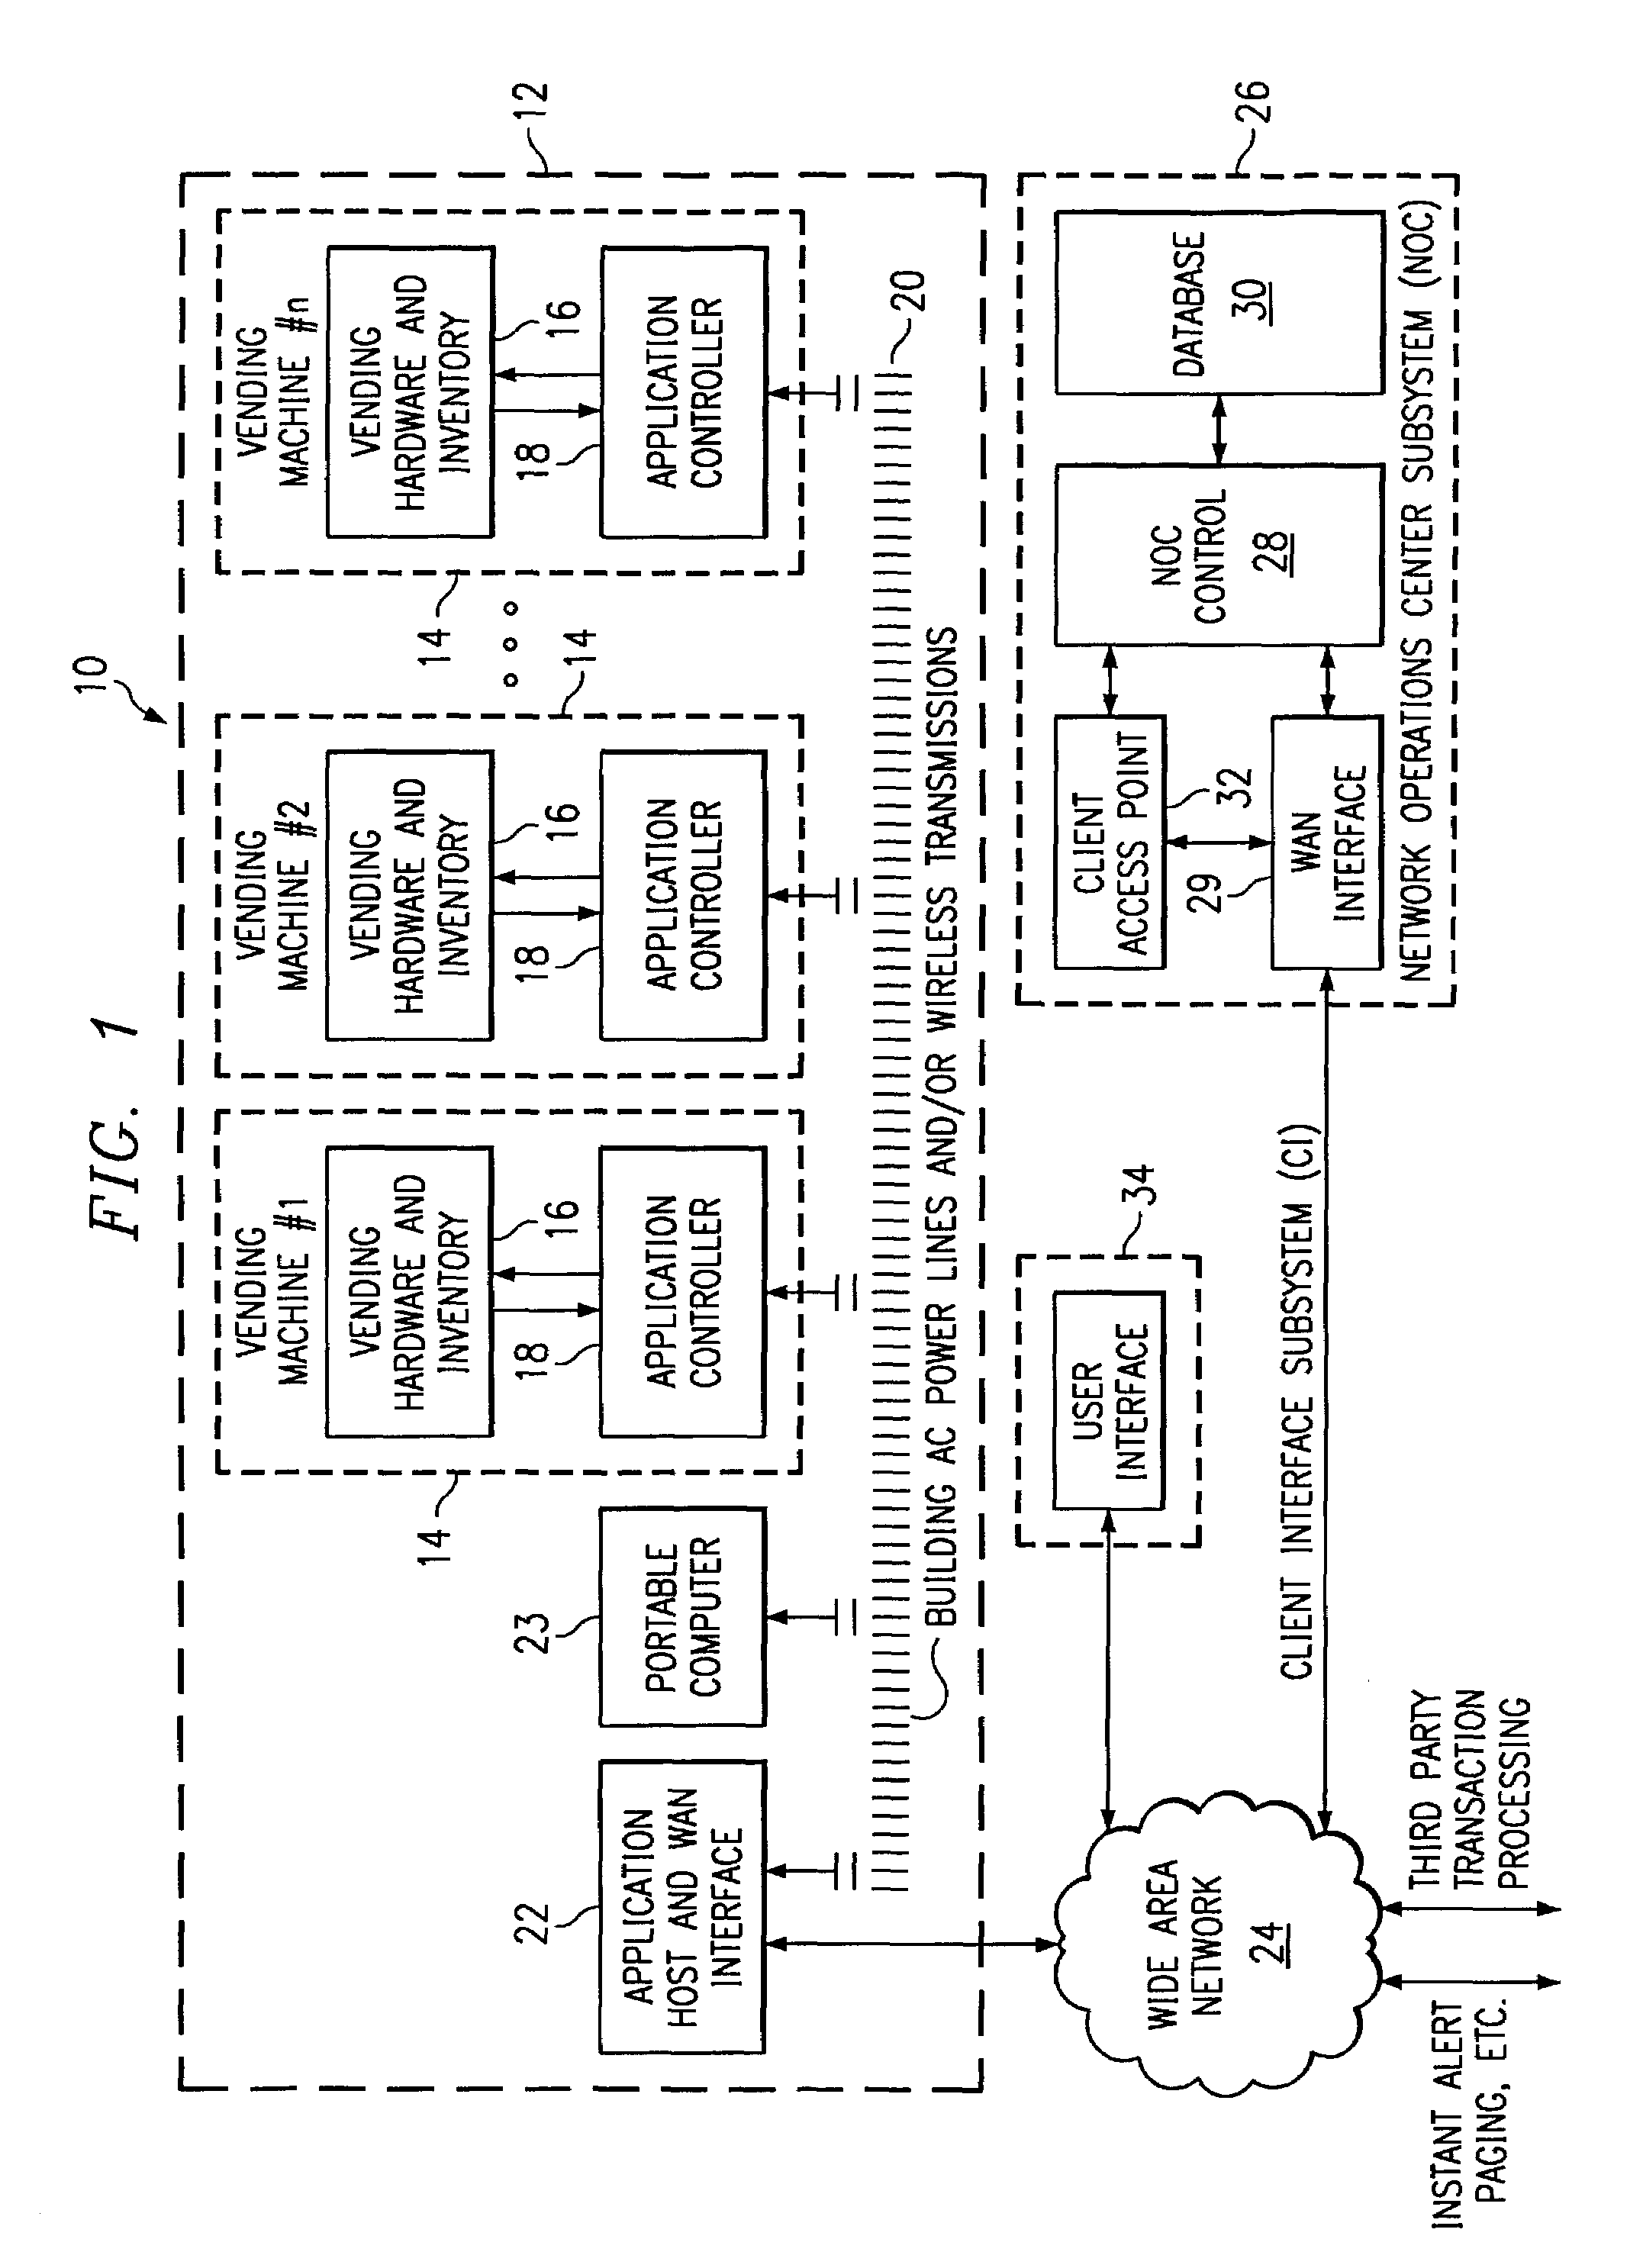 Remote data acquisition and transmission system and method